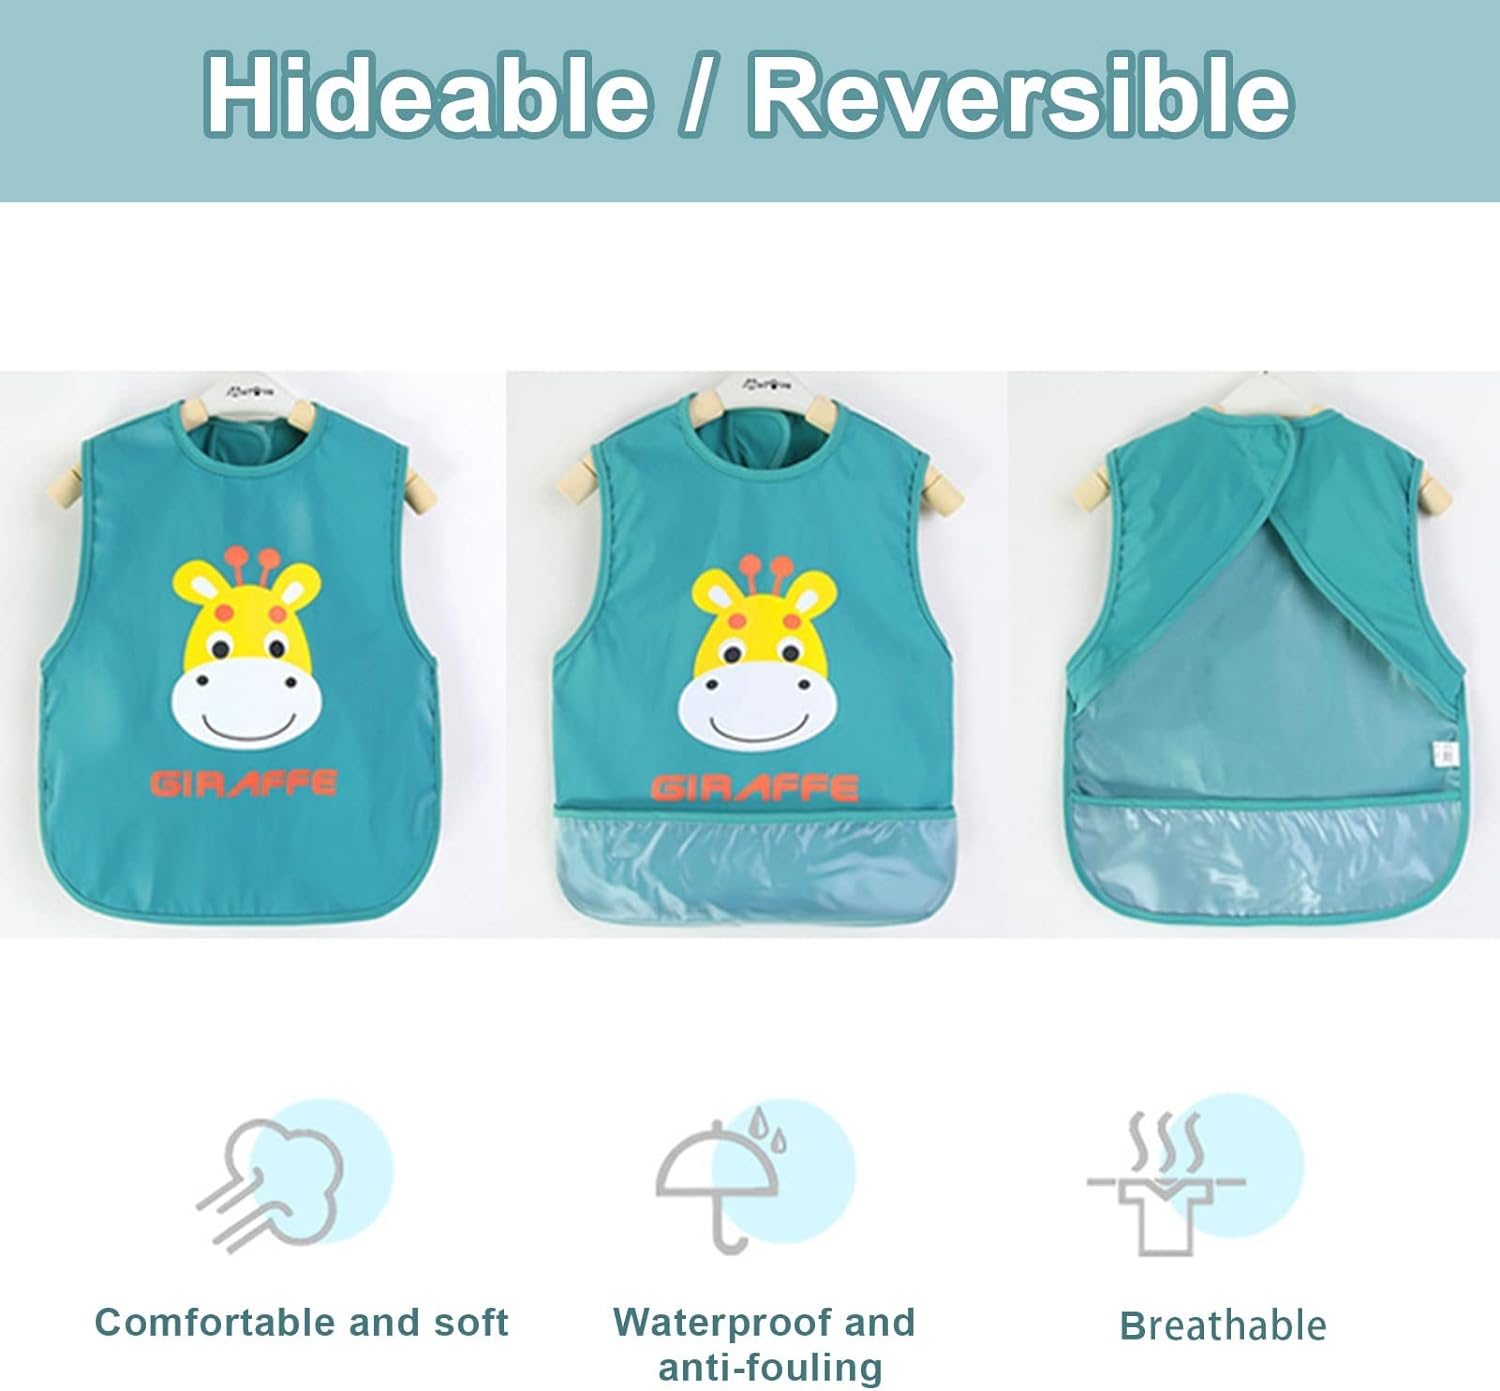 3 Pack Baby Bibs, Sleeveless Sleeve Bibs, Toddler Bibs Baby Feeding Bib Set with Crumb Catcher Pocket, Unisex Washable Adjustable Apron Little Kids Soft Protection Clothes 6-12 Months